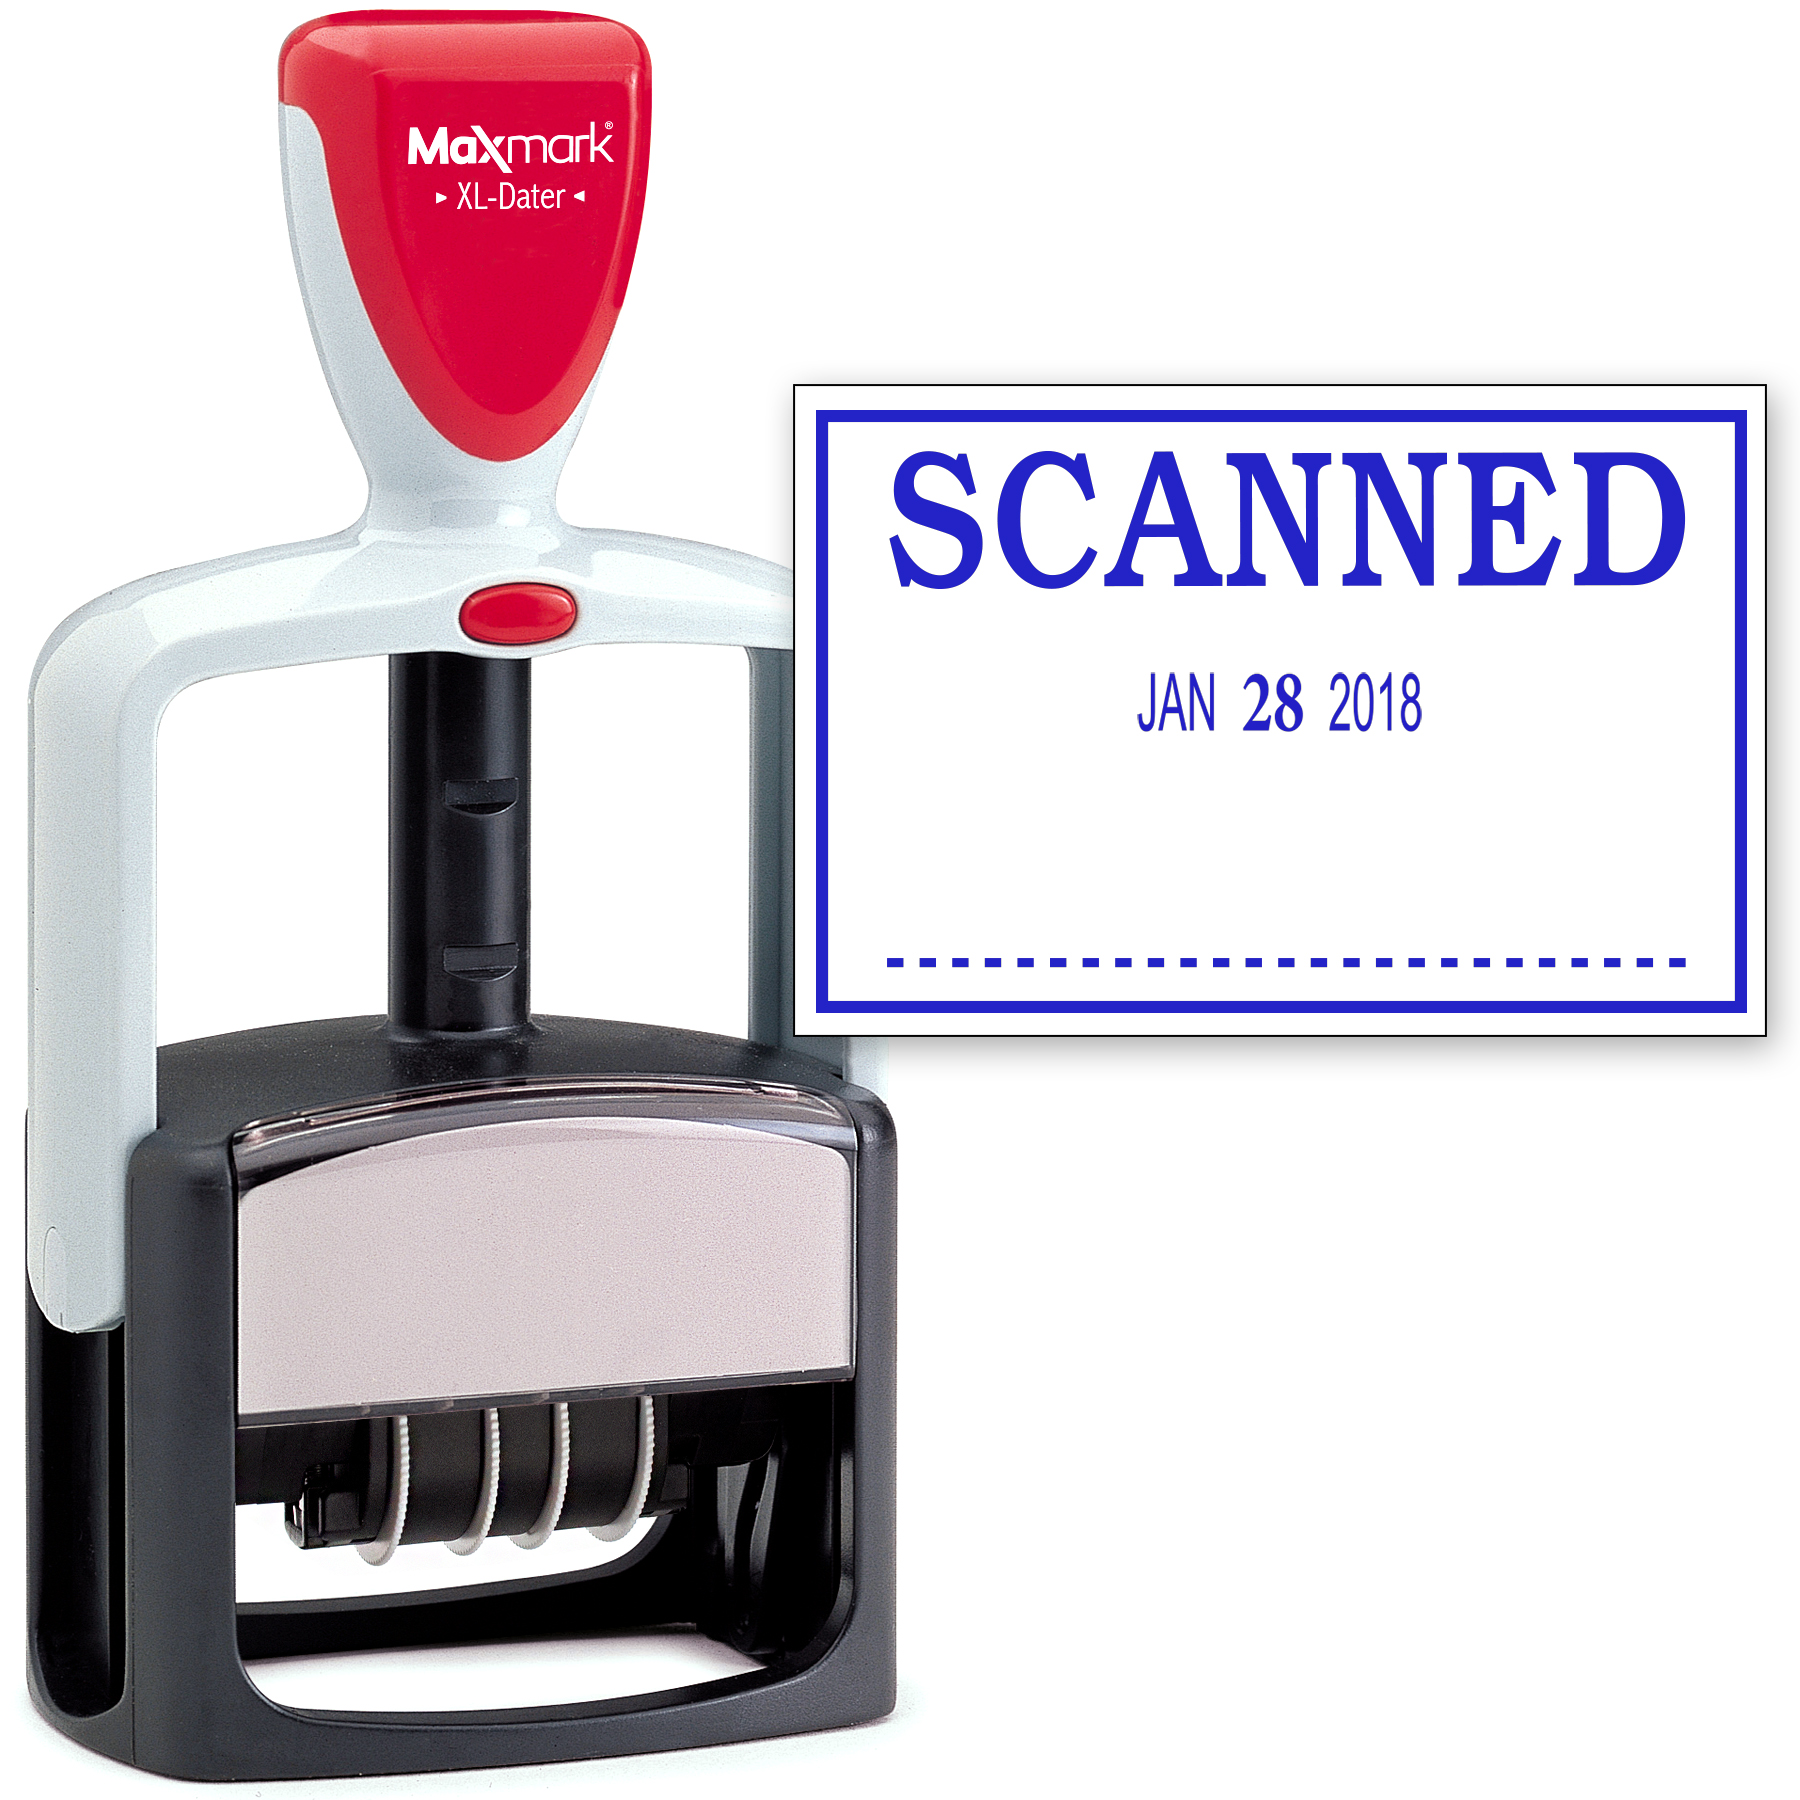 2000 PLUS Heavy Duty Style 2-Color Date Stamp with SCANNED self inking stamp - Blue Ink